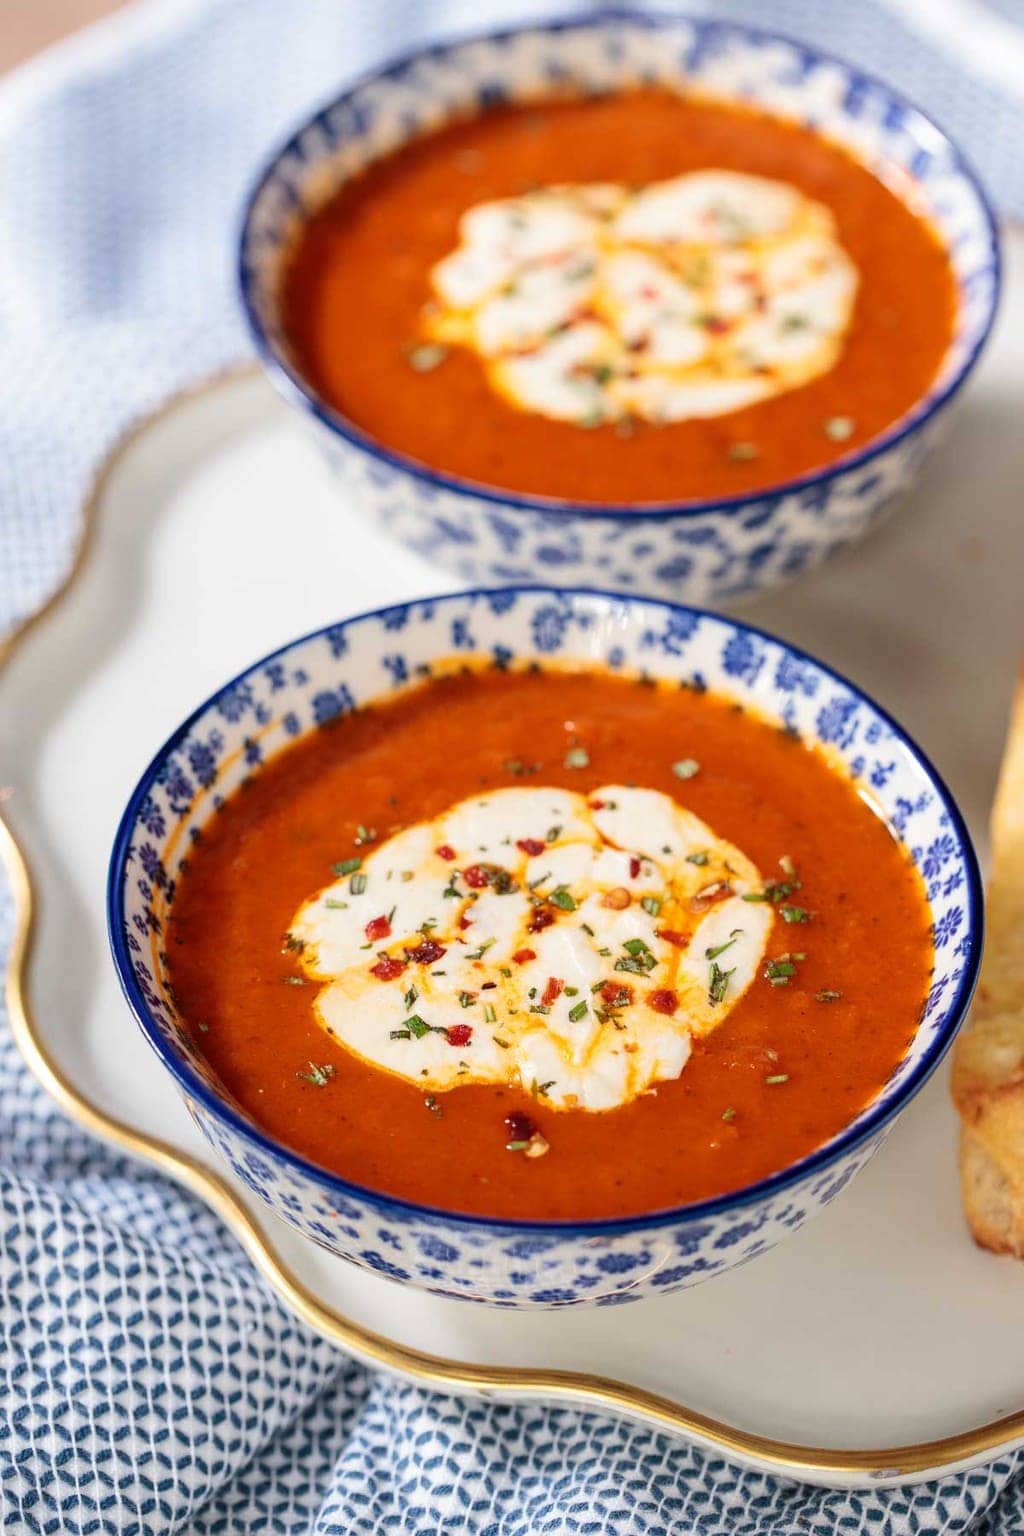 Vertical photo of Roasted Red Pepper Tomato Soup in blue and white patterned bowls.